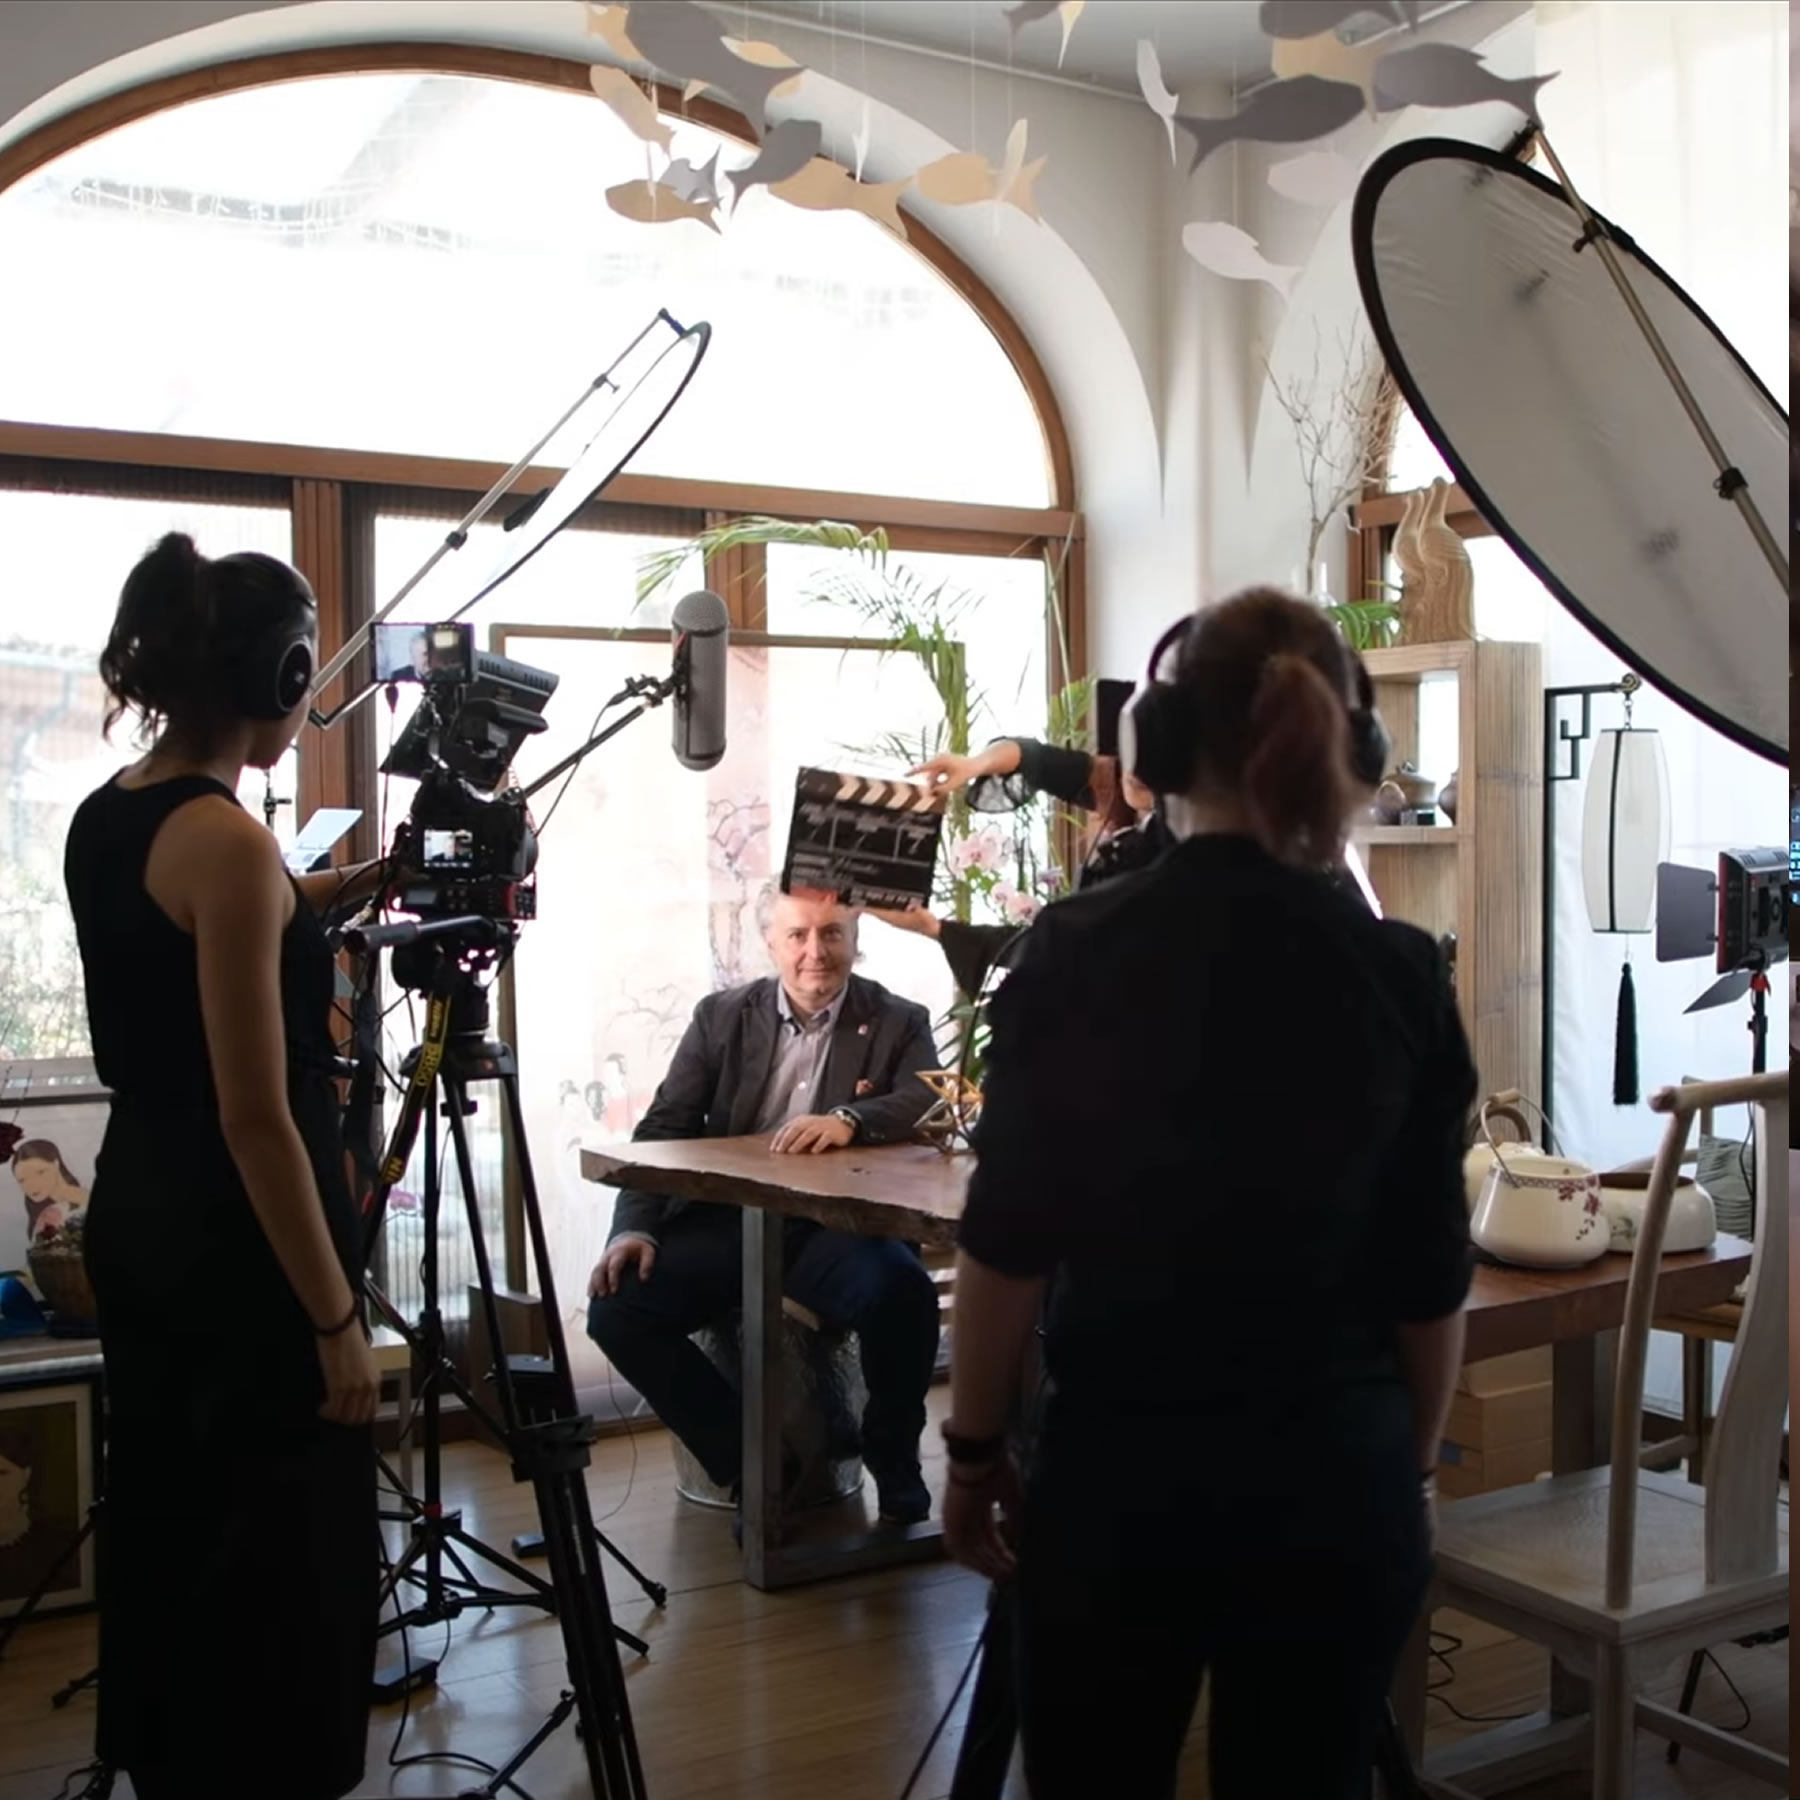 scene from a video interview with a designer